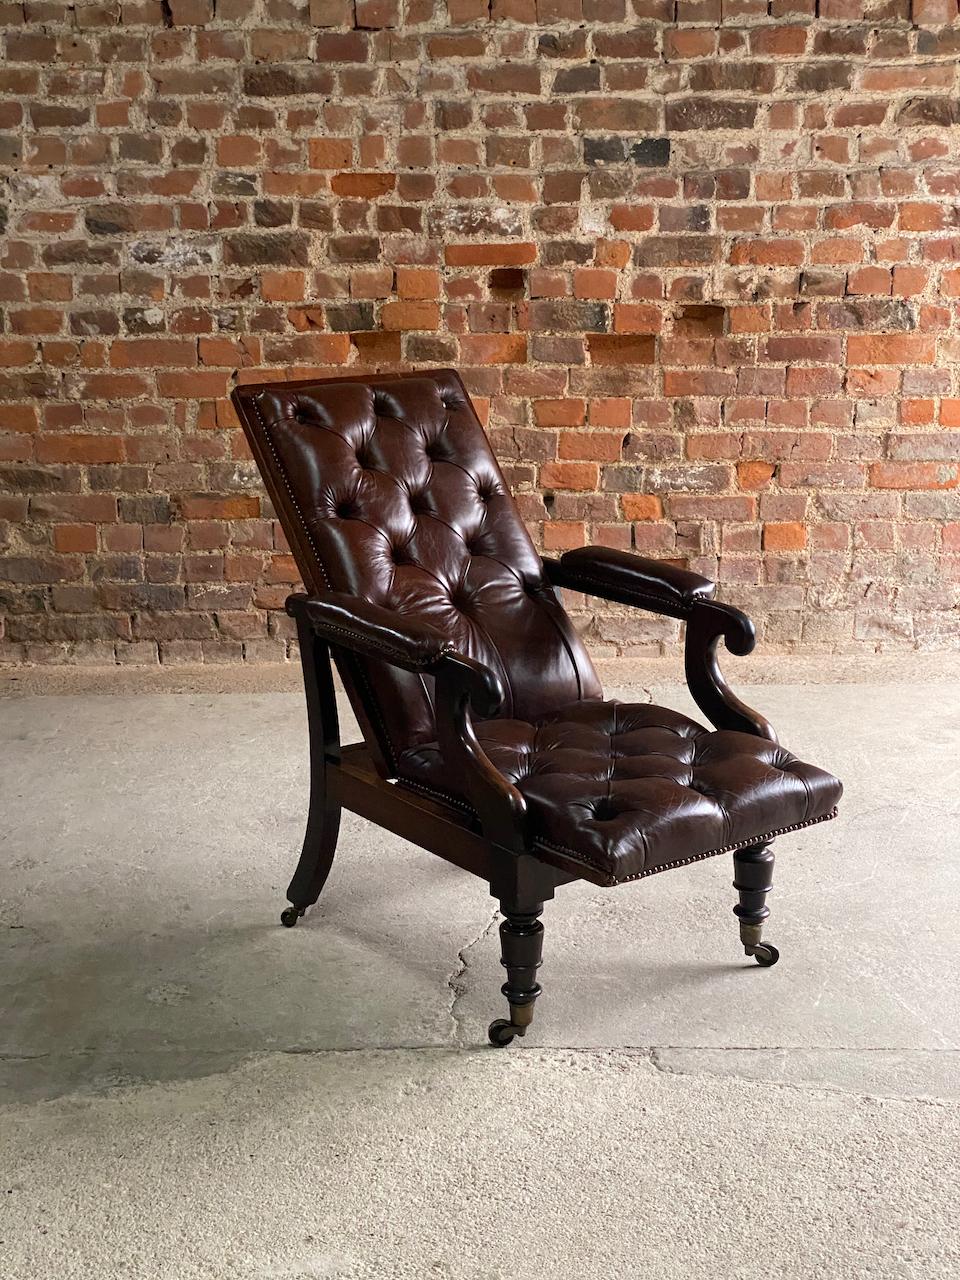 Antique William IV Mahogany reclining library armchair Circa 1835

Magnificent antique William VI Reclining Mahogany & Leather Library Armchair early 19th century England circa 1835, the chair with its beautiful brown buttoned leather upholstery